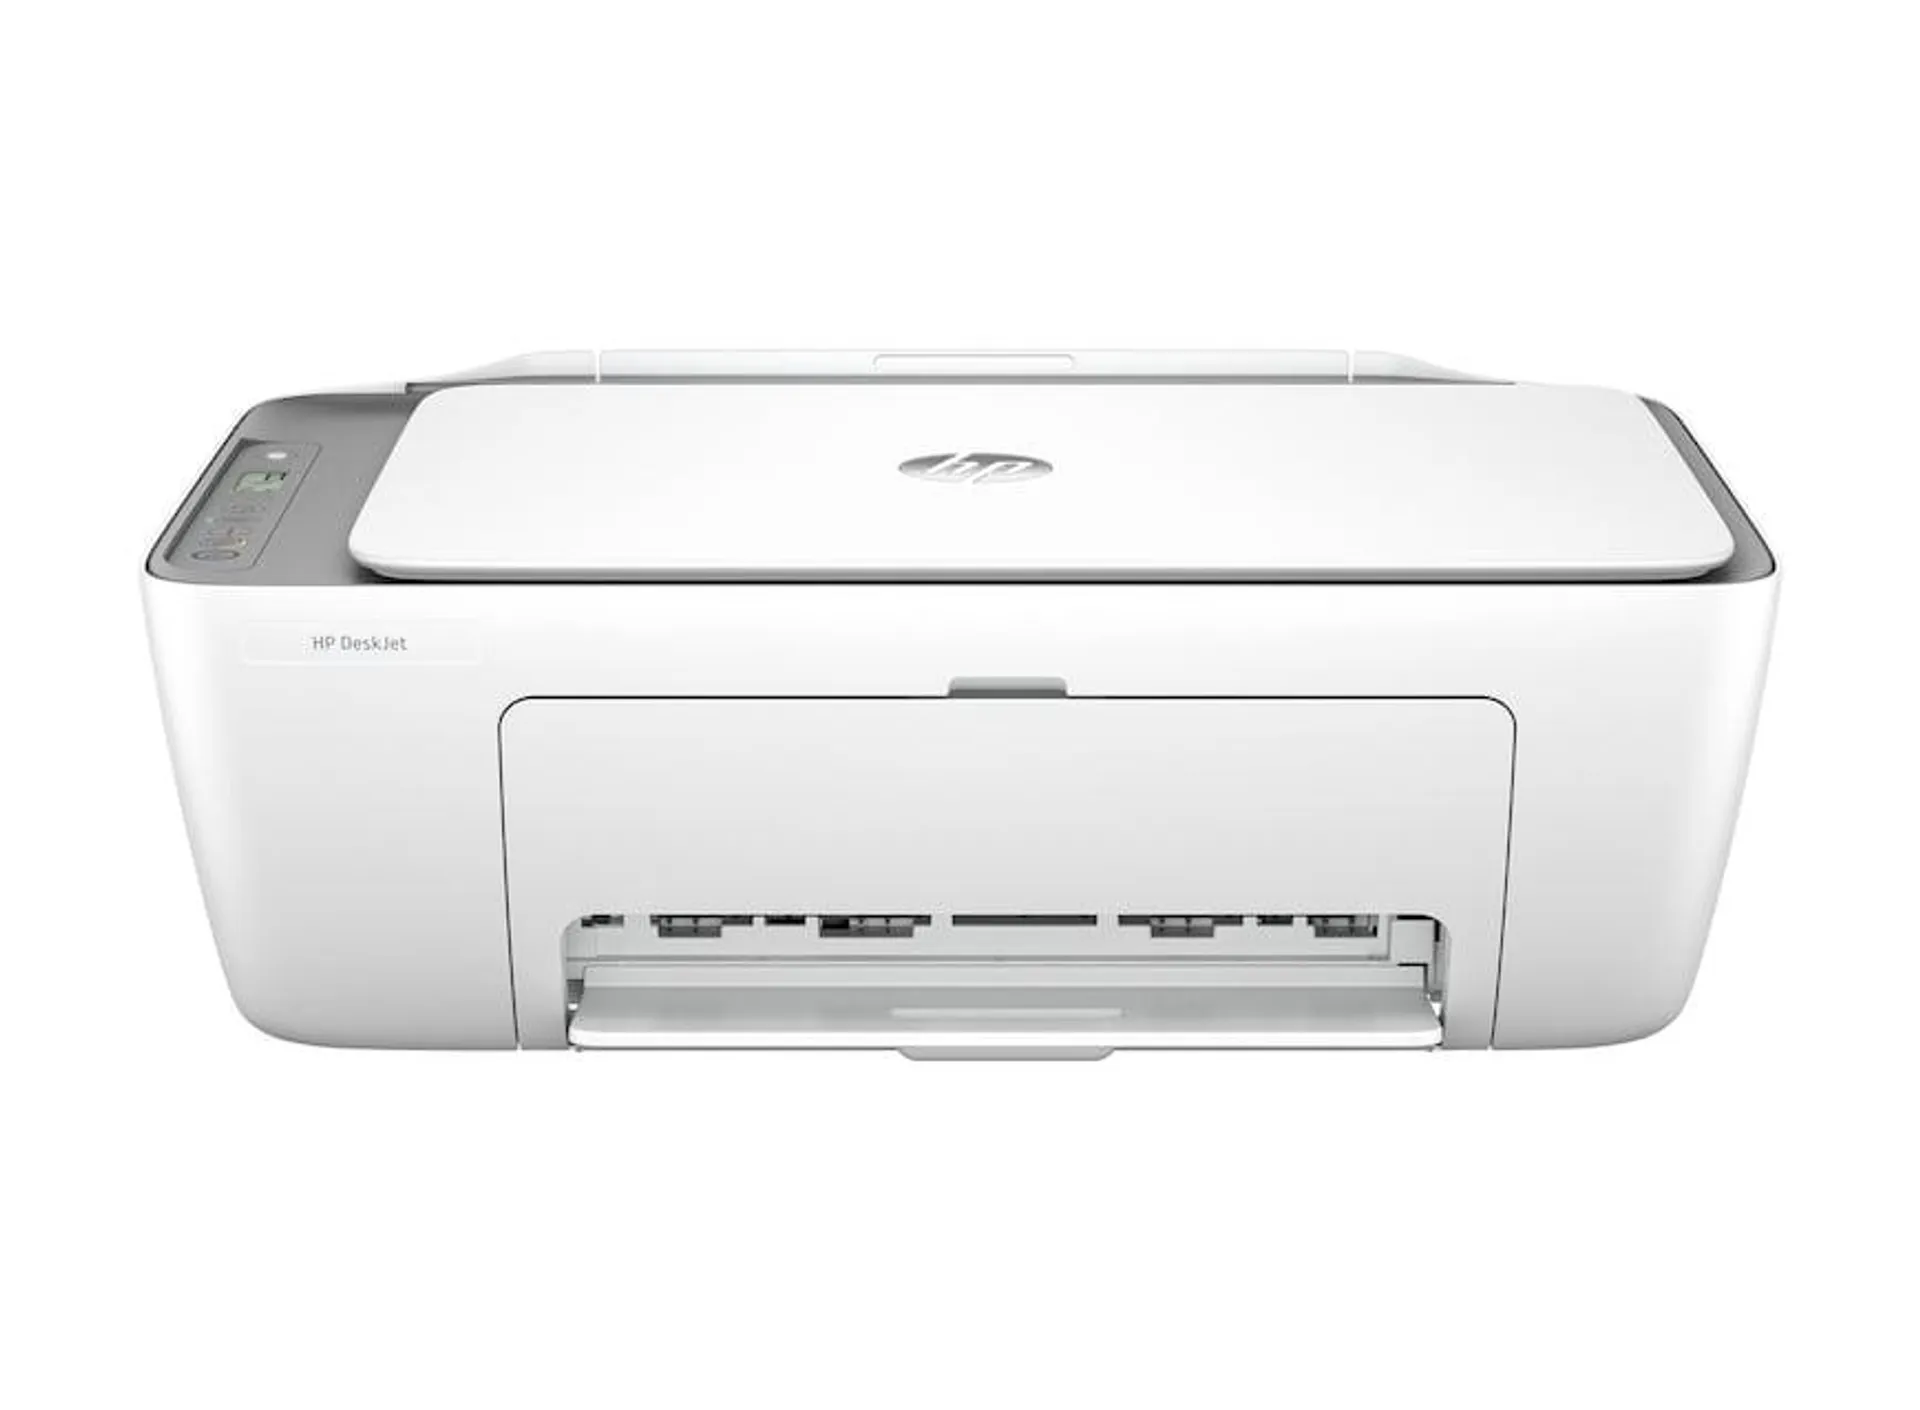 HP DeskJet 2820e HP+ enabled Wireless All-In-One Printer with 3 Months Instant Ink